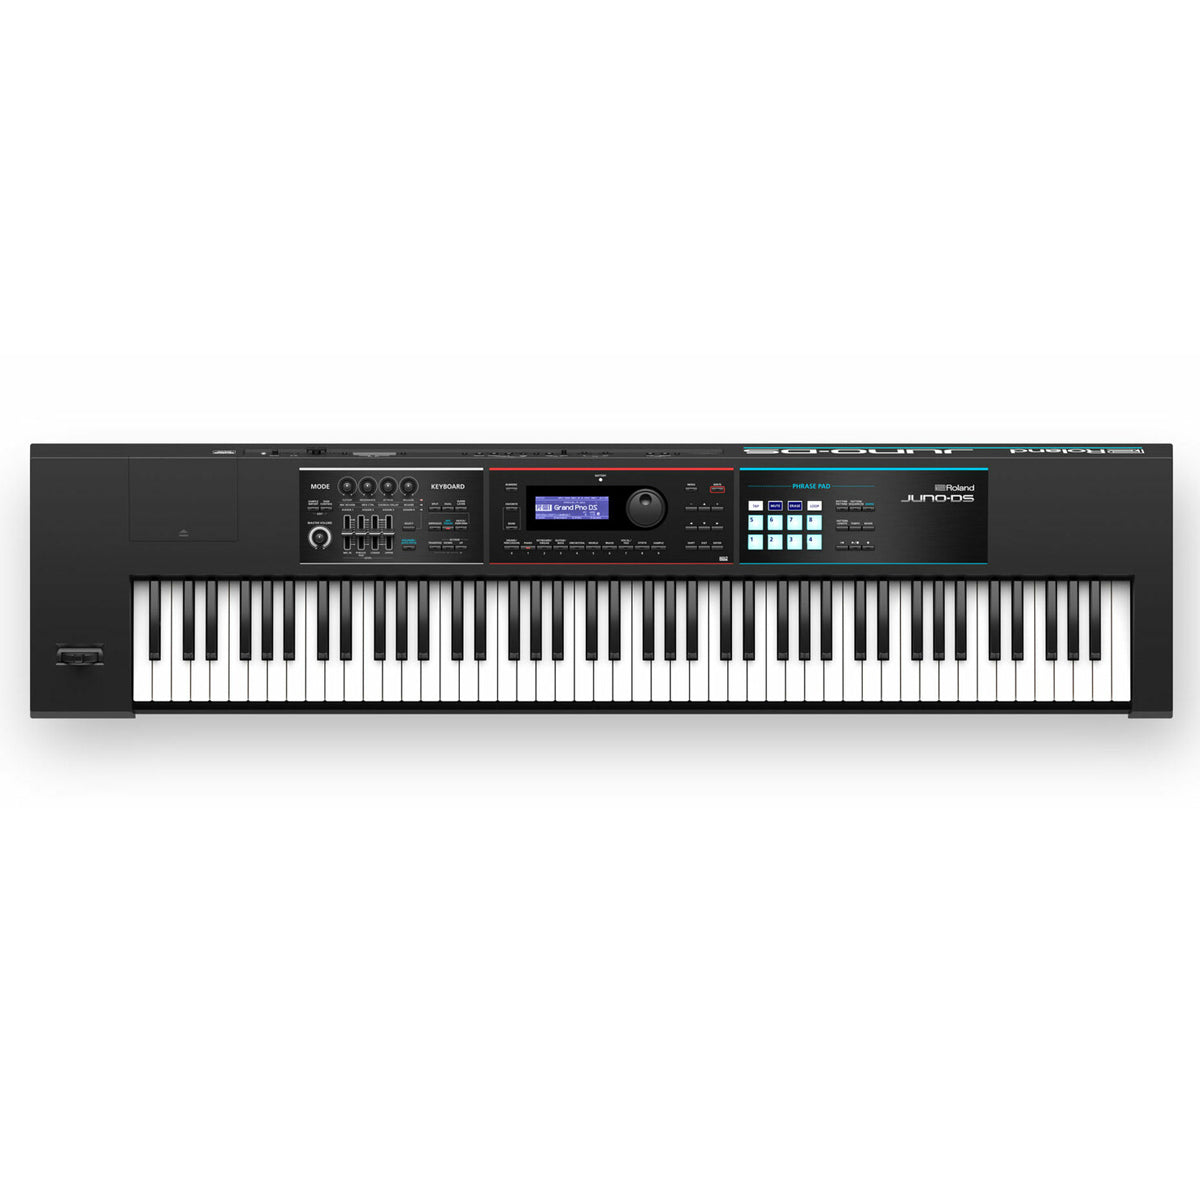 Roland JUNO-DS-88 Synthesizer